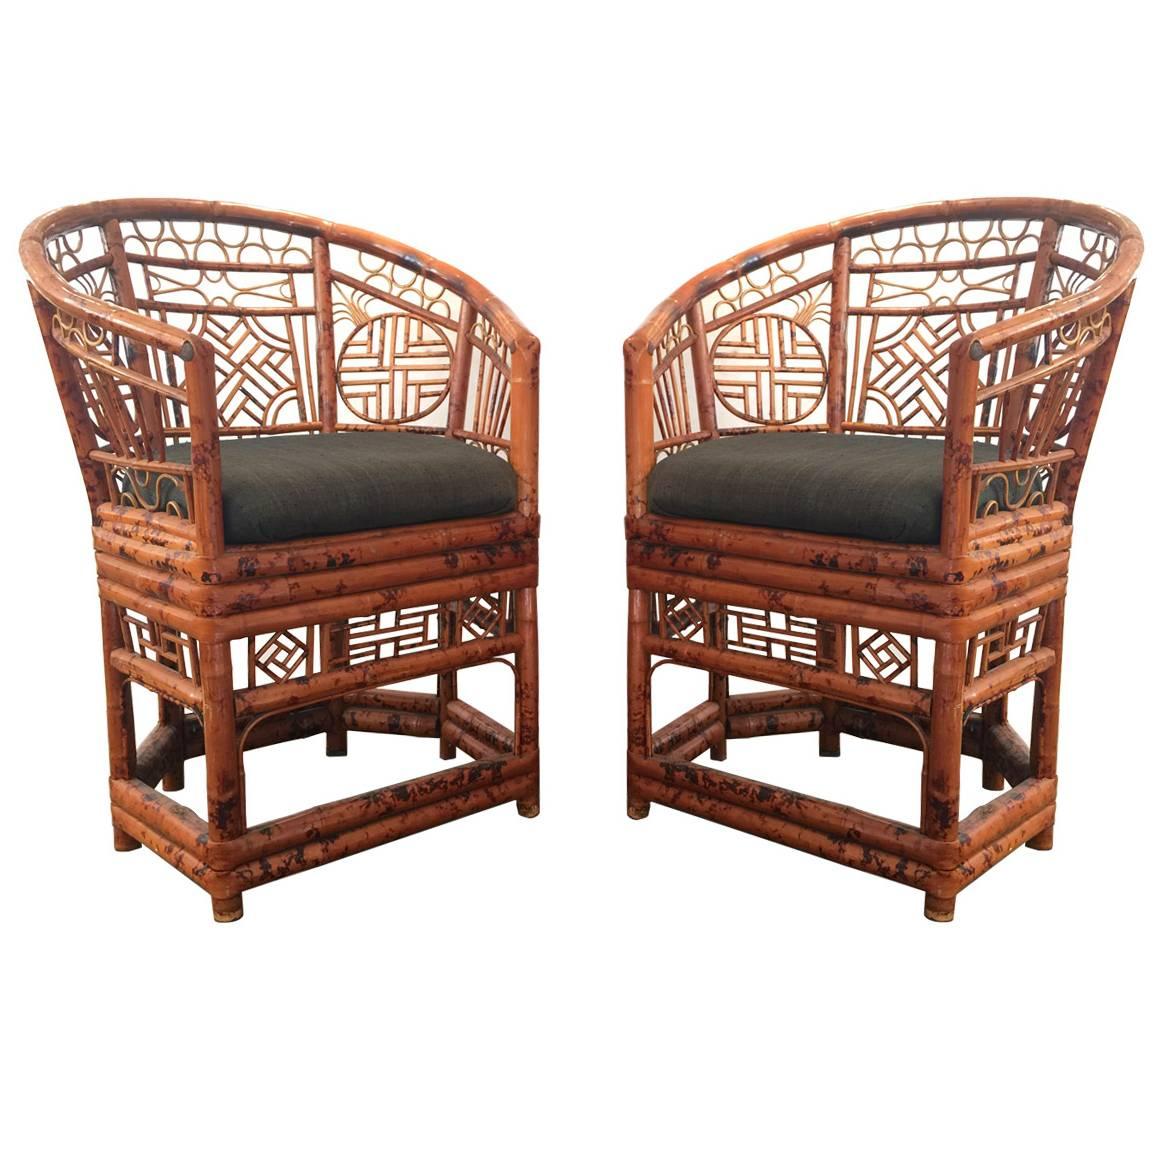 Pair of Brighton Pavilion Chinoiserie Chippendale Tortoise Rattan Chairs